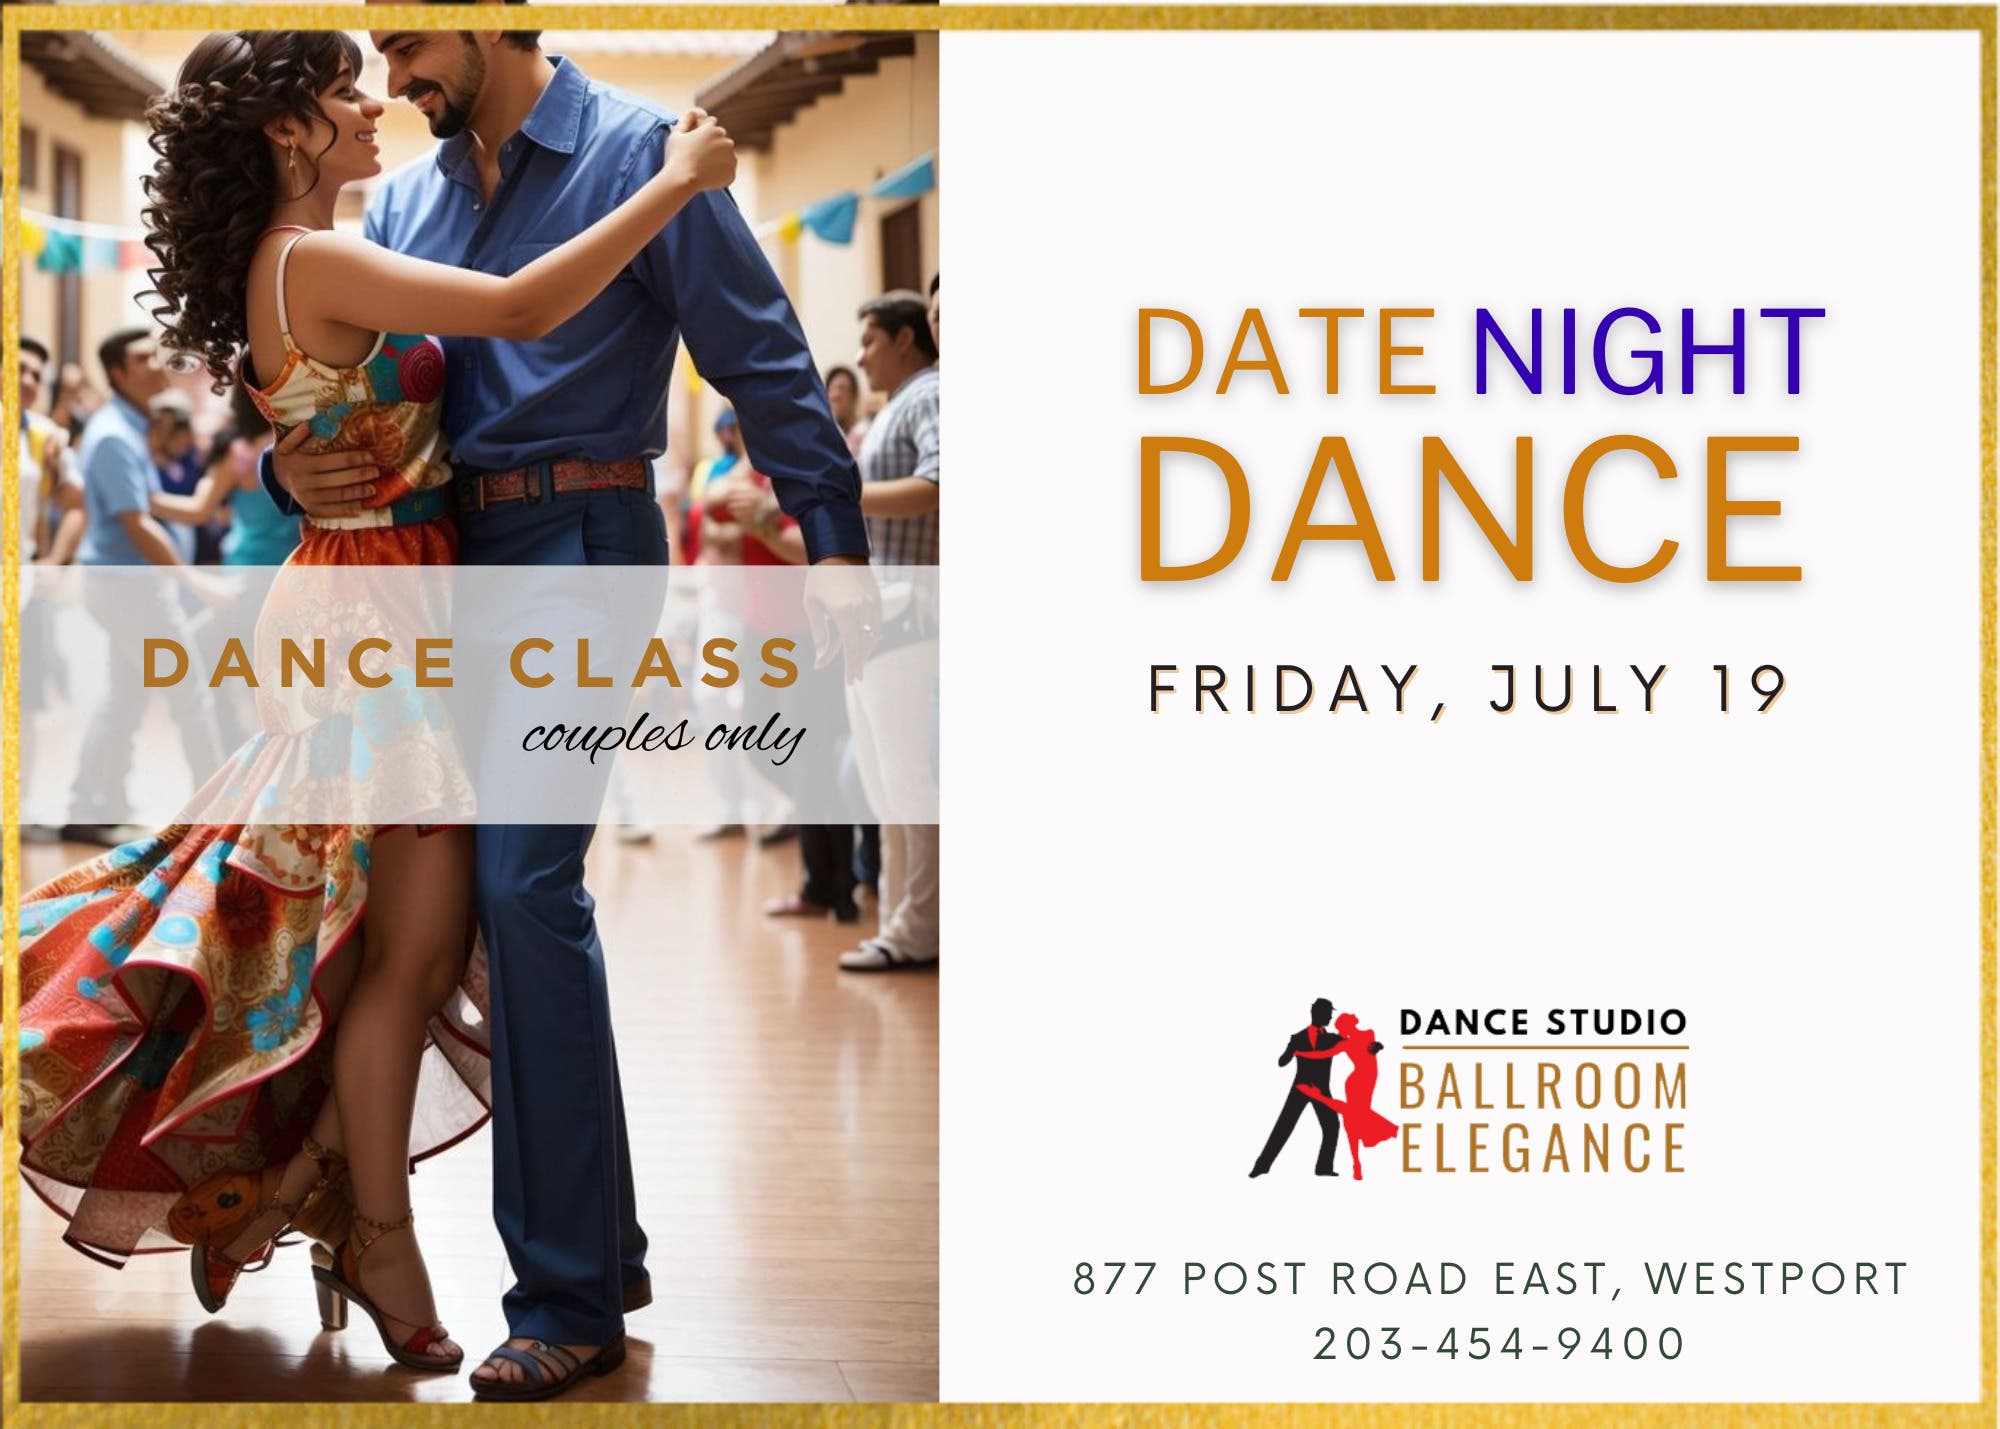 “Date Night Dance” - Add joy and romance of the Dance to your Date